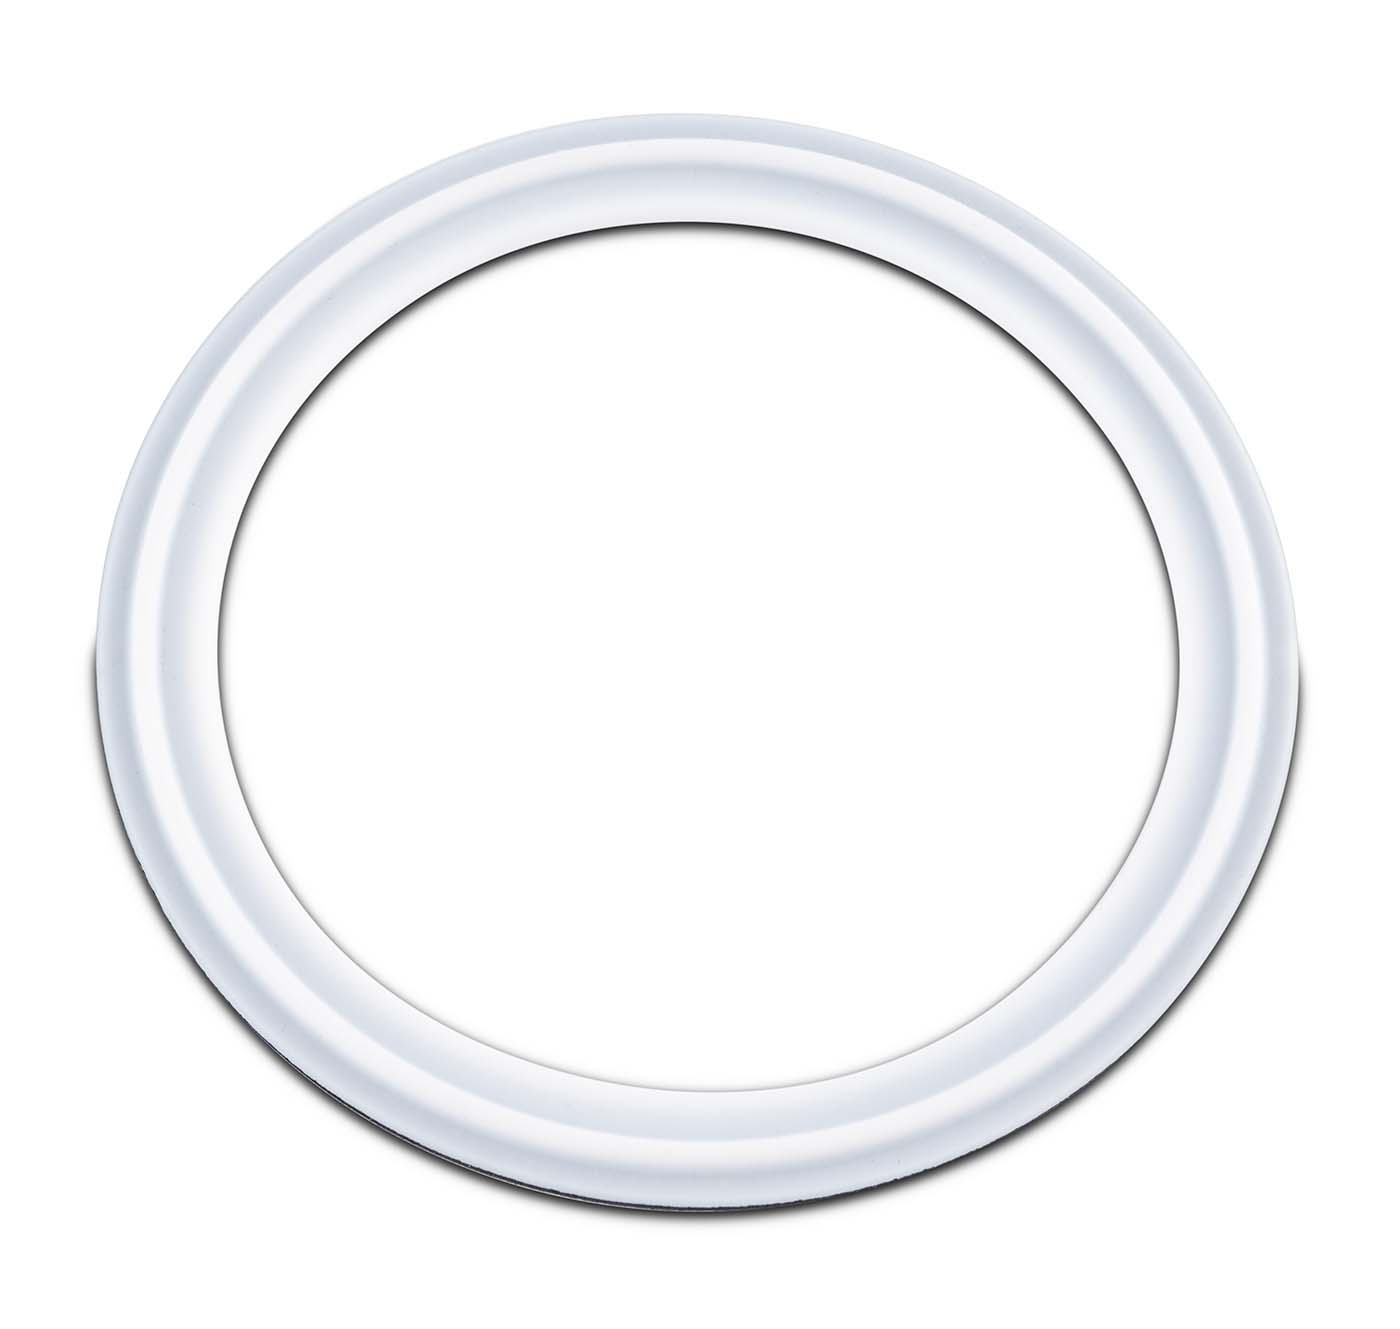 PTFE Envelope Tri-Clamp Gaskets with Viton Filler Shop All Categories BVV 3-inch